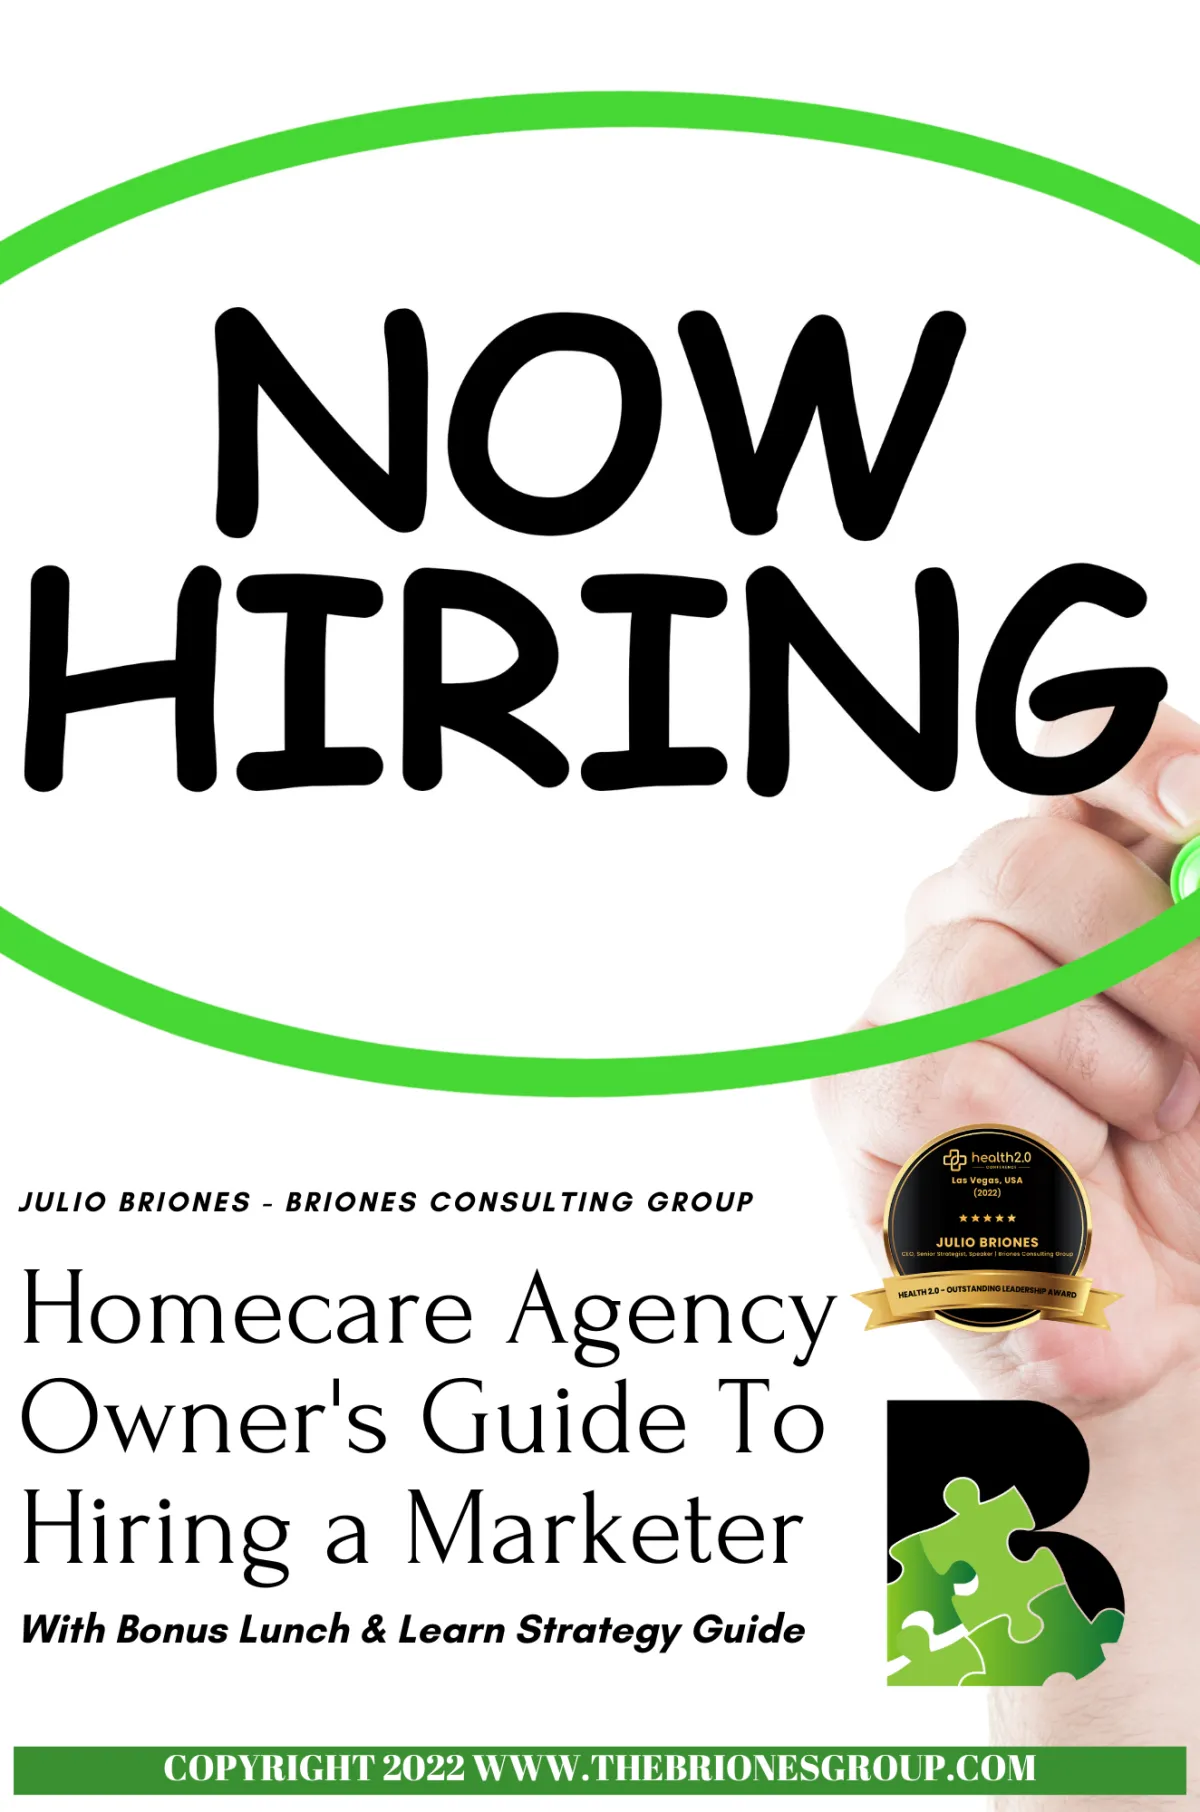 homecare Agency Owners Guide to Hiring a Marketer by Julio Briones